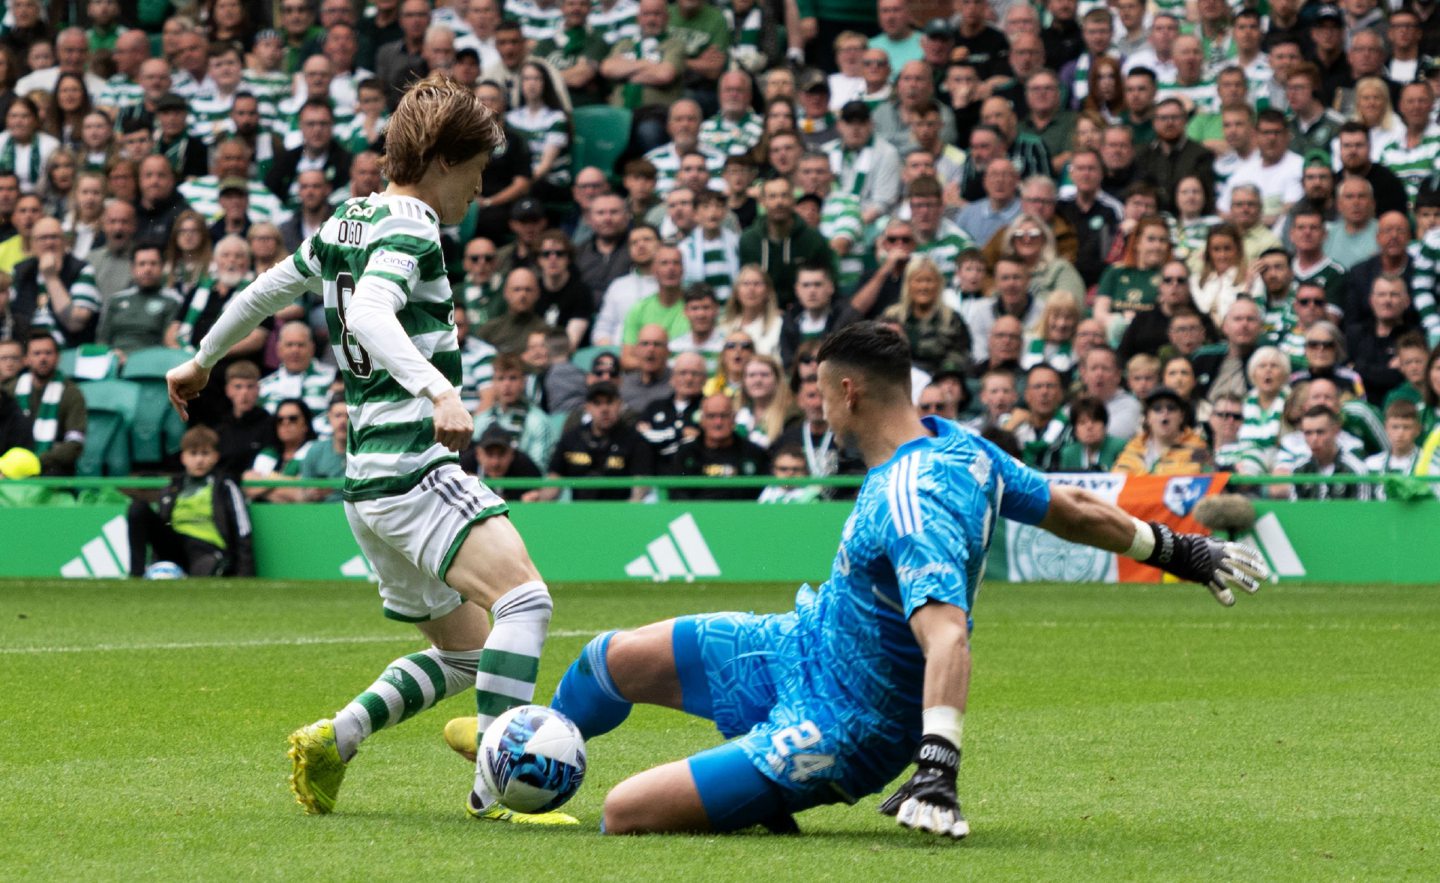 Celtic's Kyogo Furuhashi goes down under a tackle from Kelle Roos. 